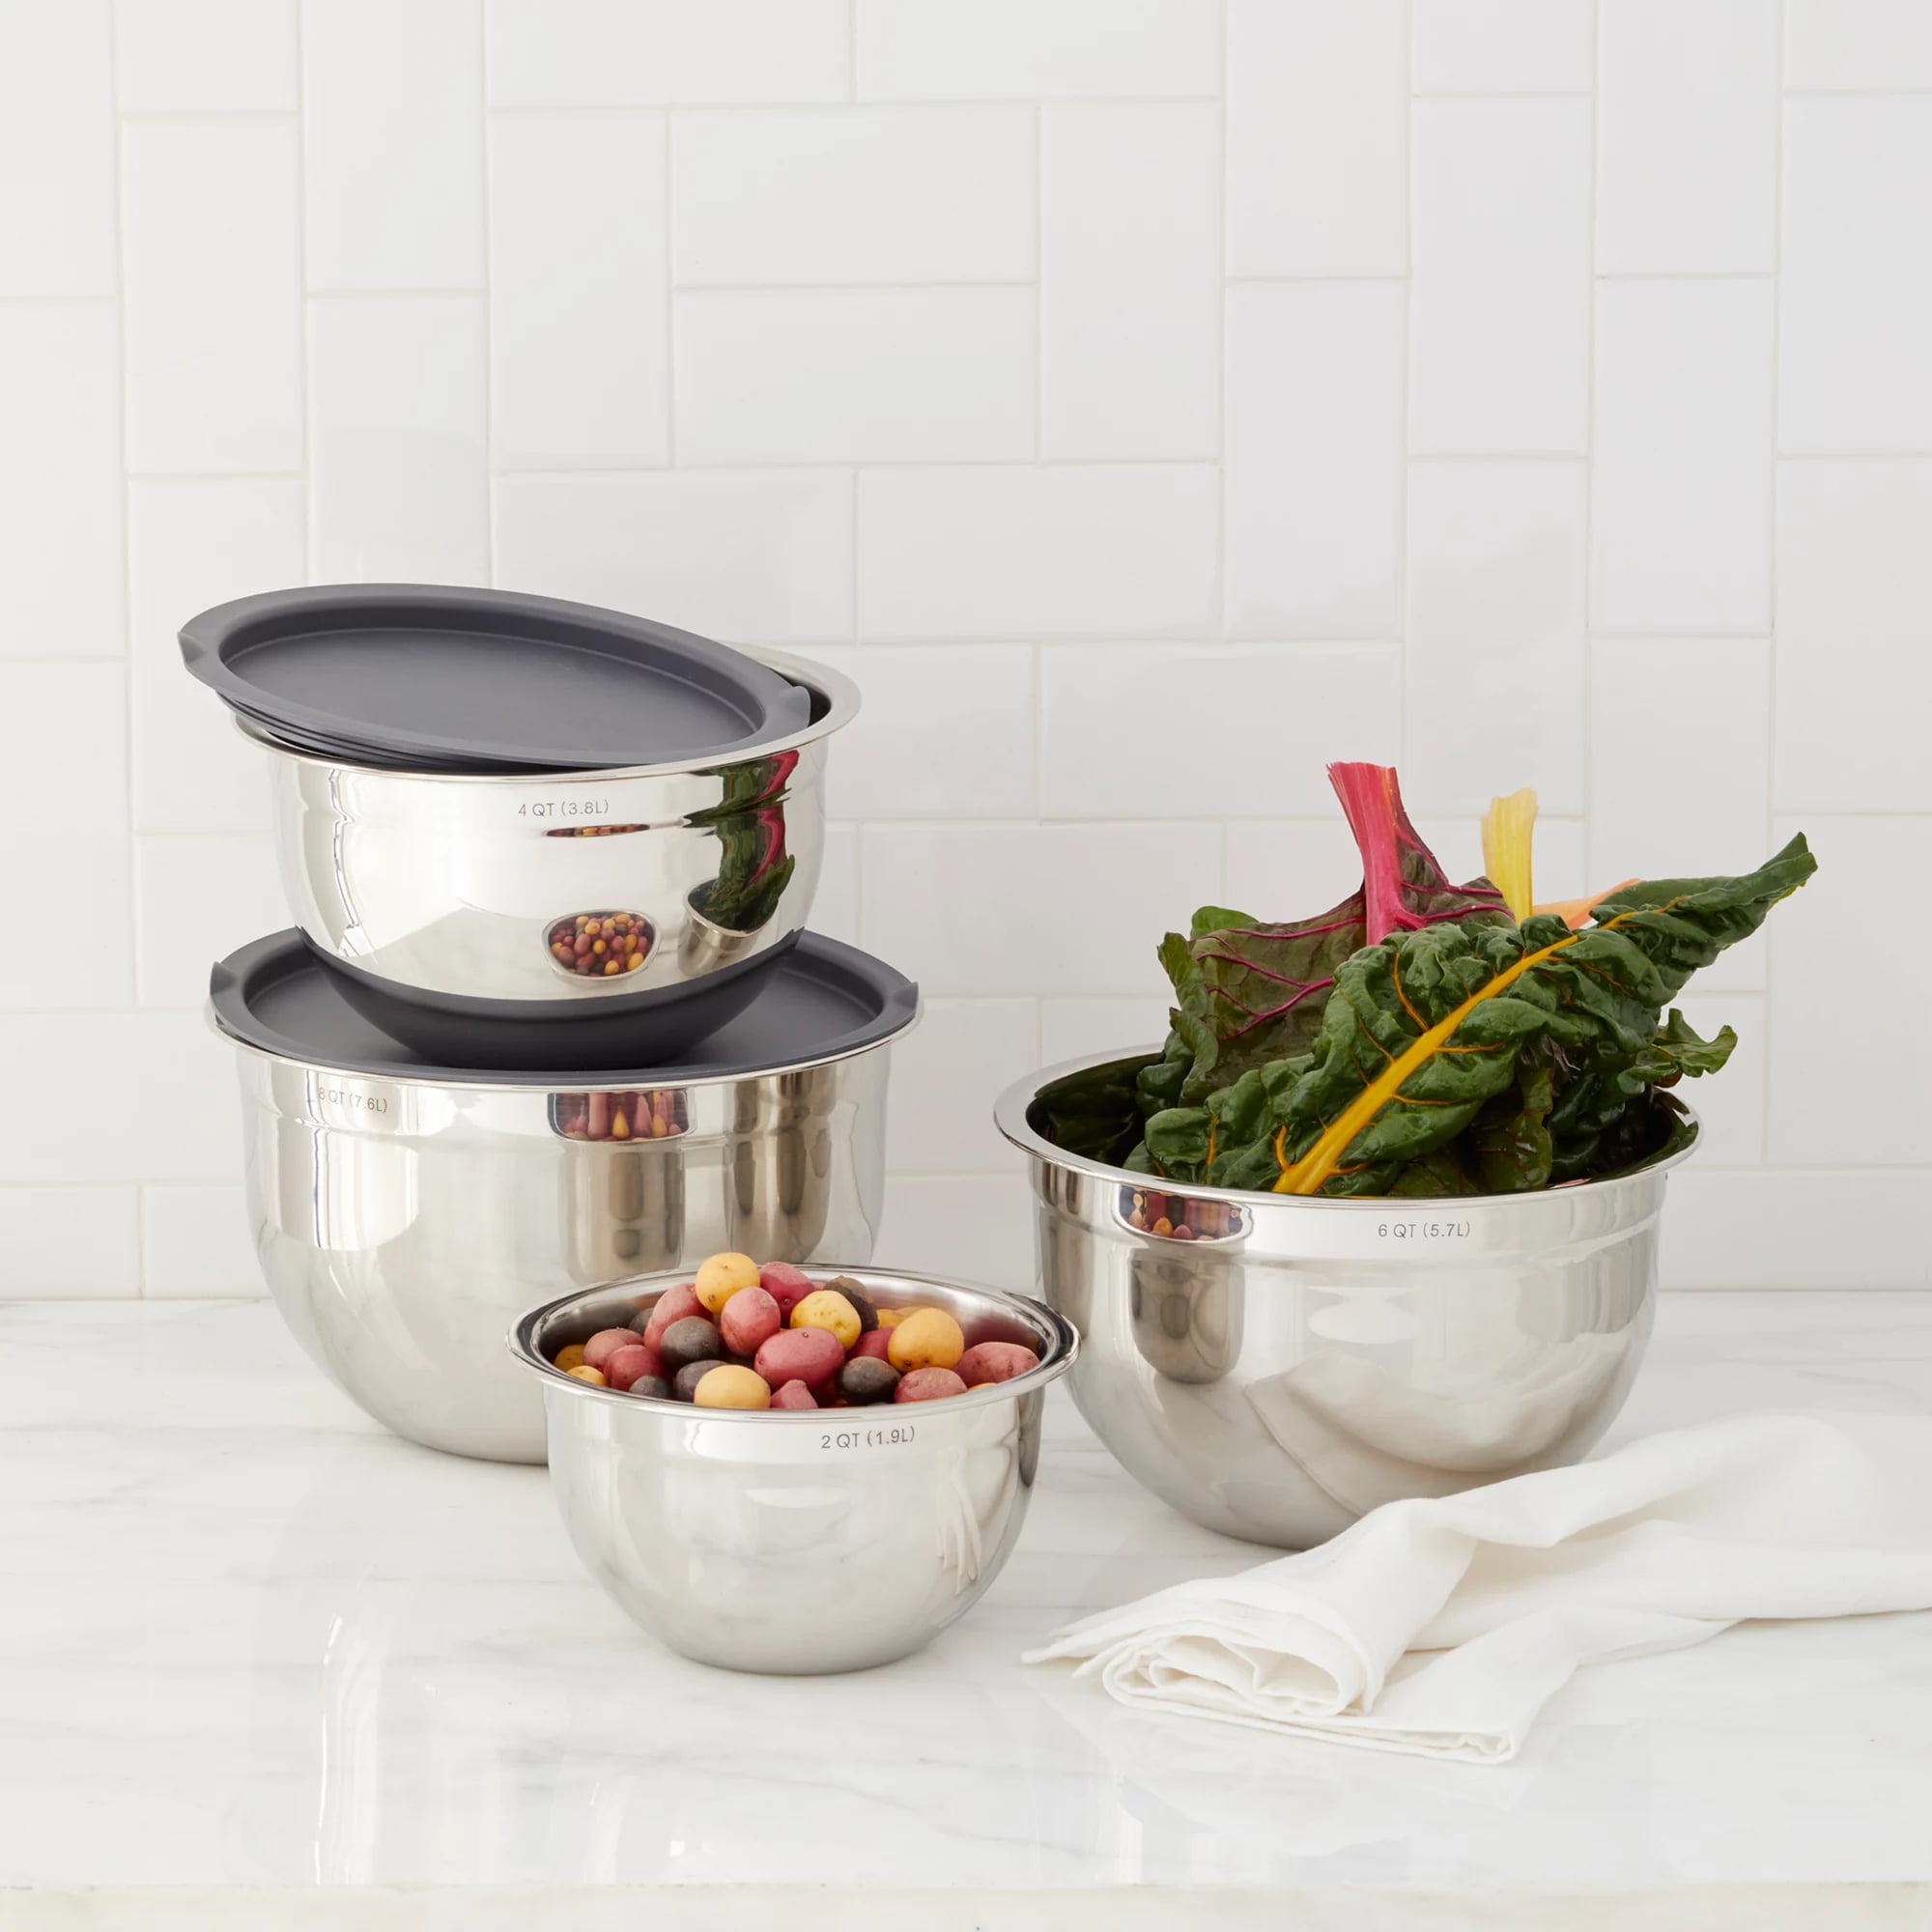 Bed Bath & Beyond: 50% off select Orgreenic cookware.